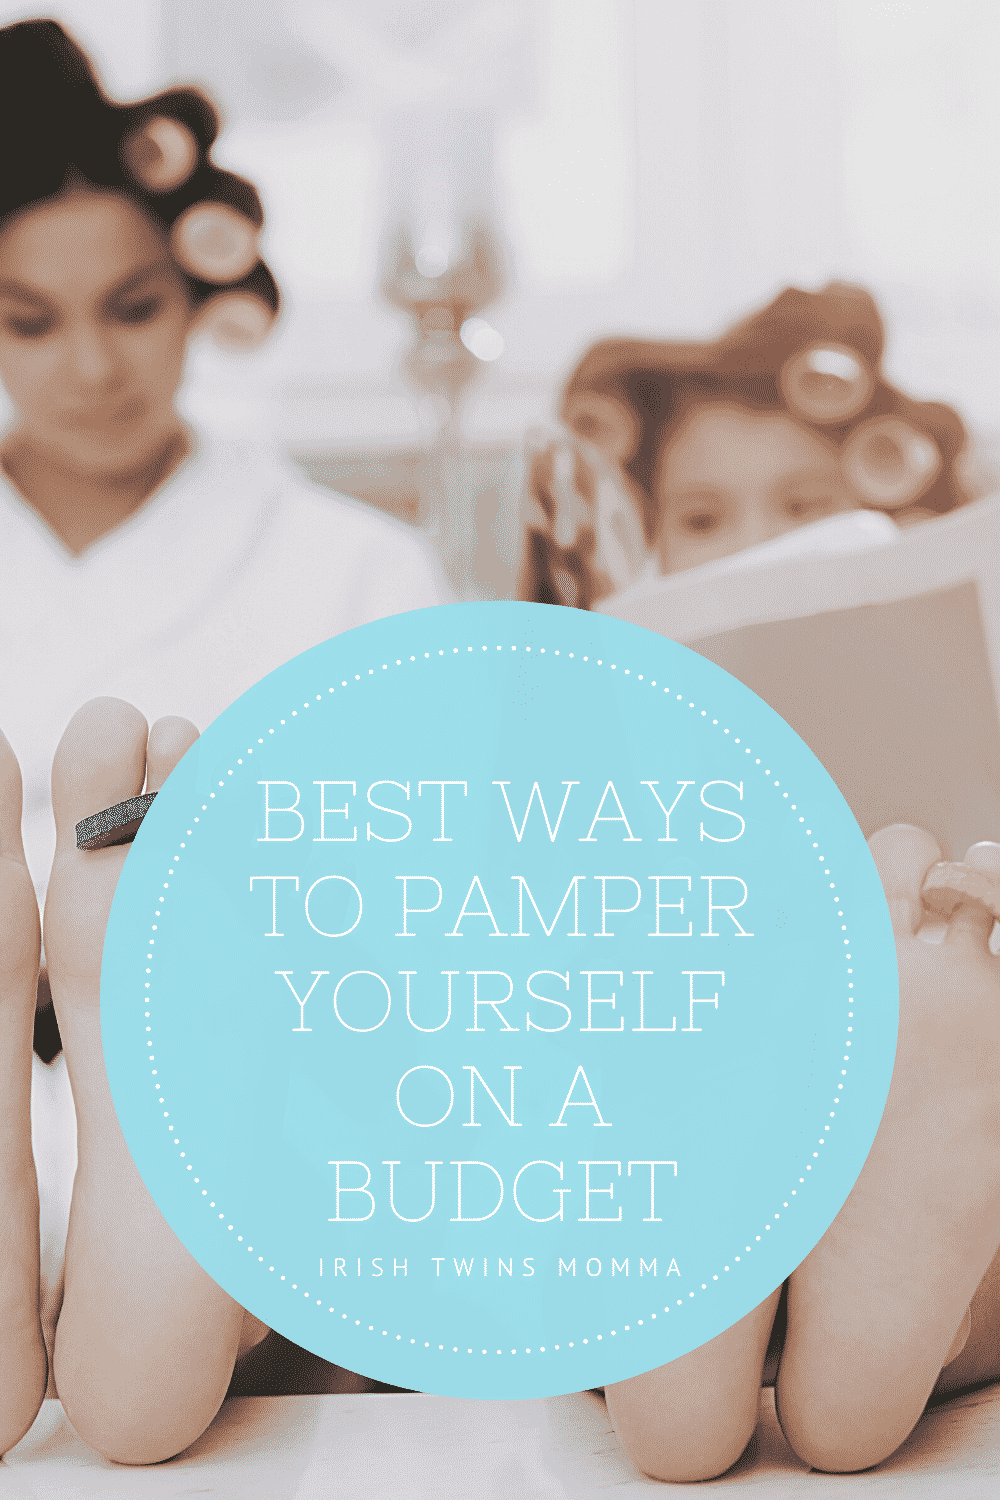 Best Ways To Pamper Yourself on a Budget